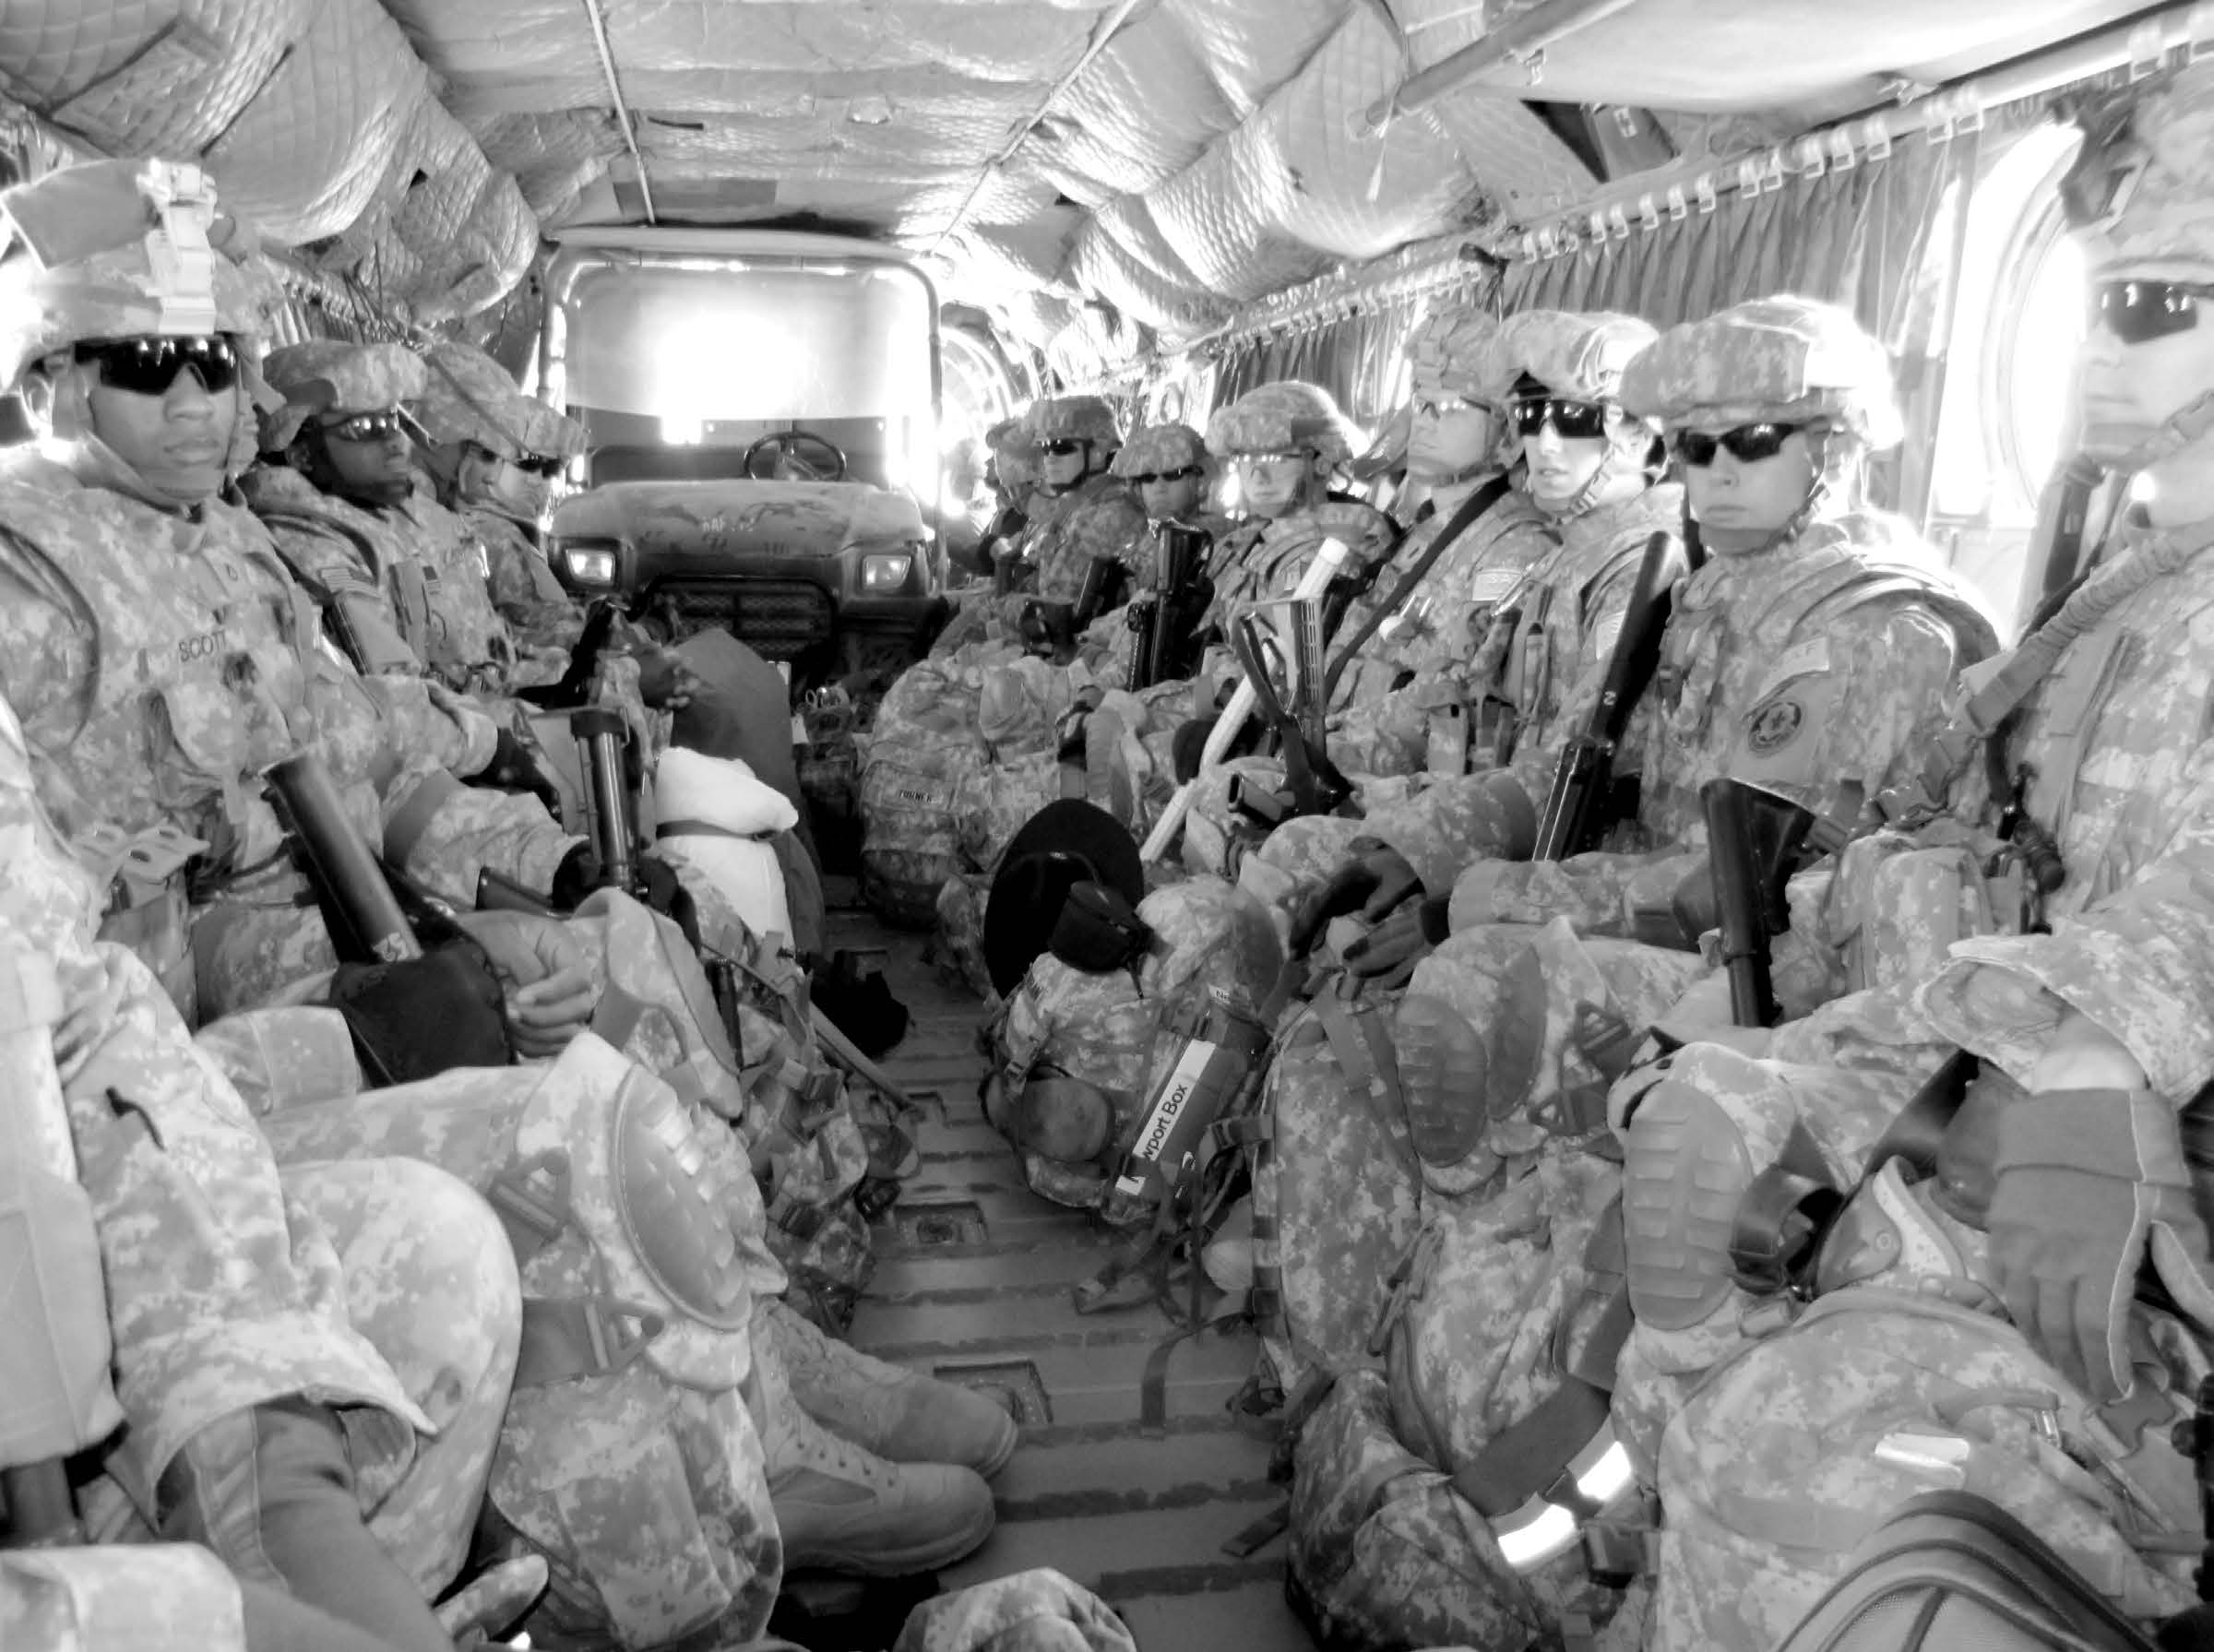 U.S. Army soldiers being transported in a CH-47 Chinook helicopter. Courtesy of J. Joseph DuWors.